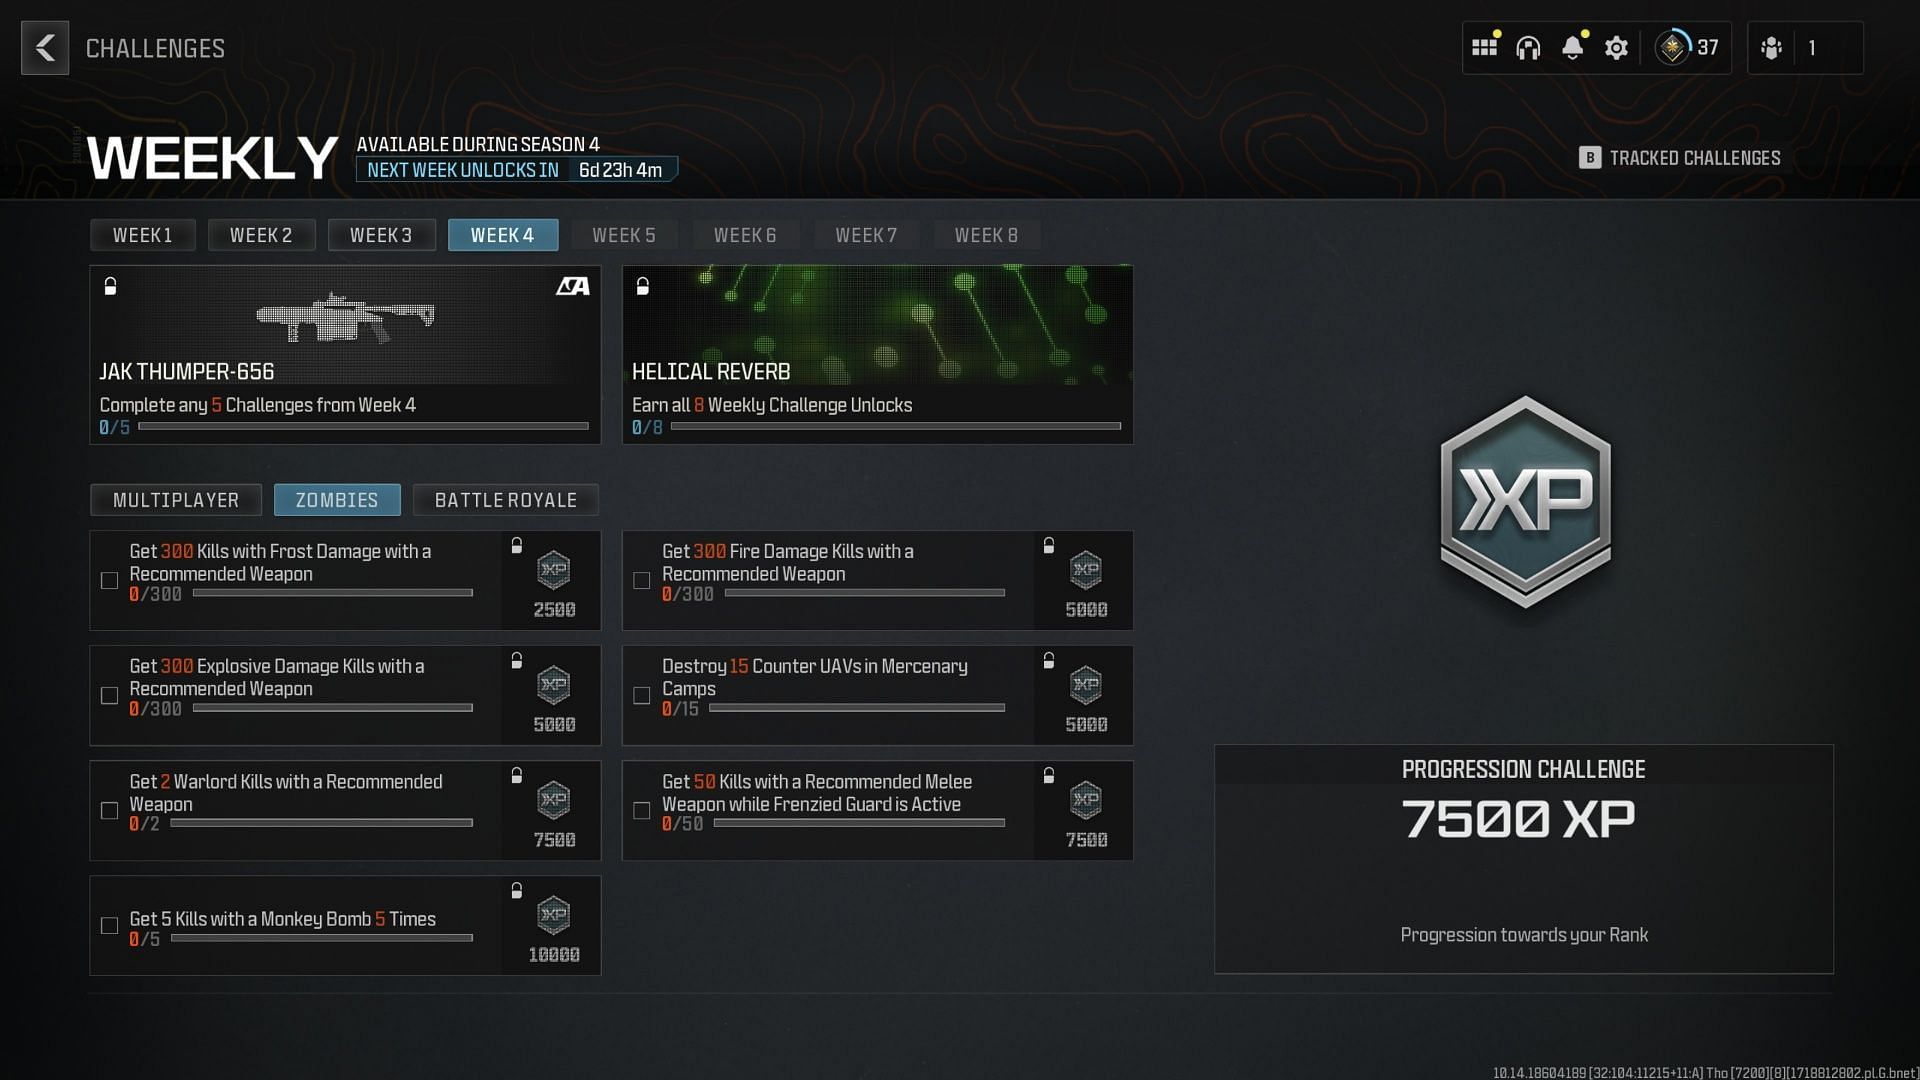 All MW3 Zombies Season 4 Week 4 challenges (Image via Activision)